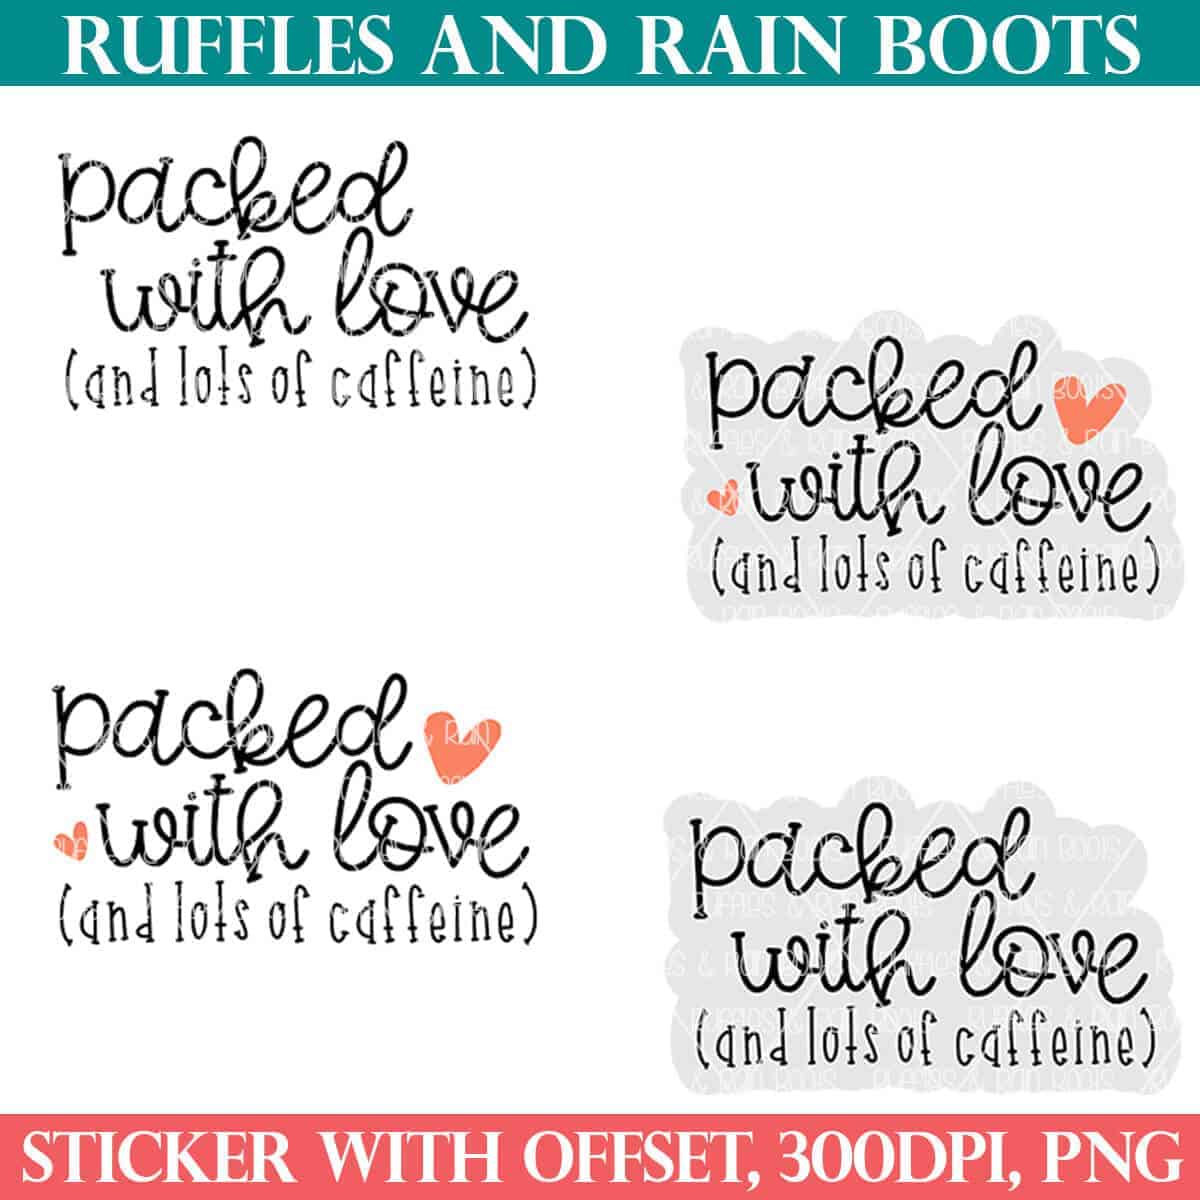 Packed with Love Sticker Set for Small Business Owners - Ruffles and Rain Boots Shop